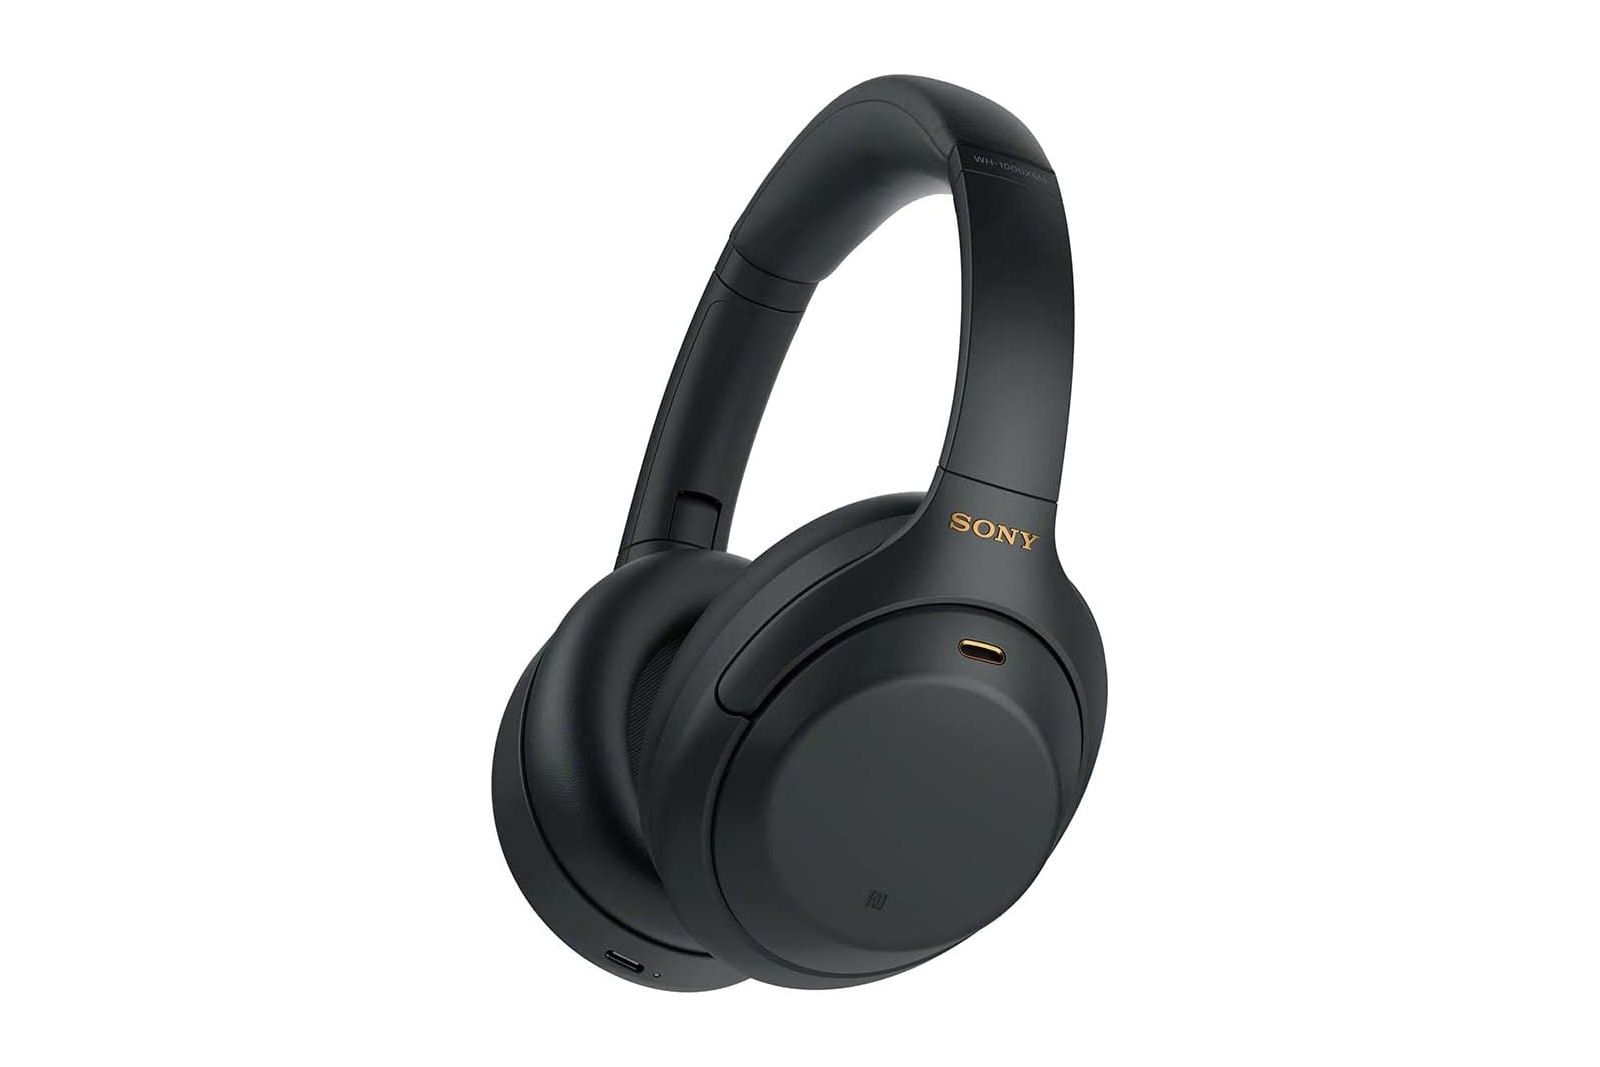 Black Sony-branded headphones with a cushioned band and a port on the side.